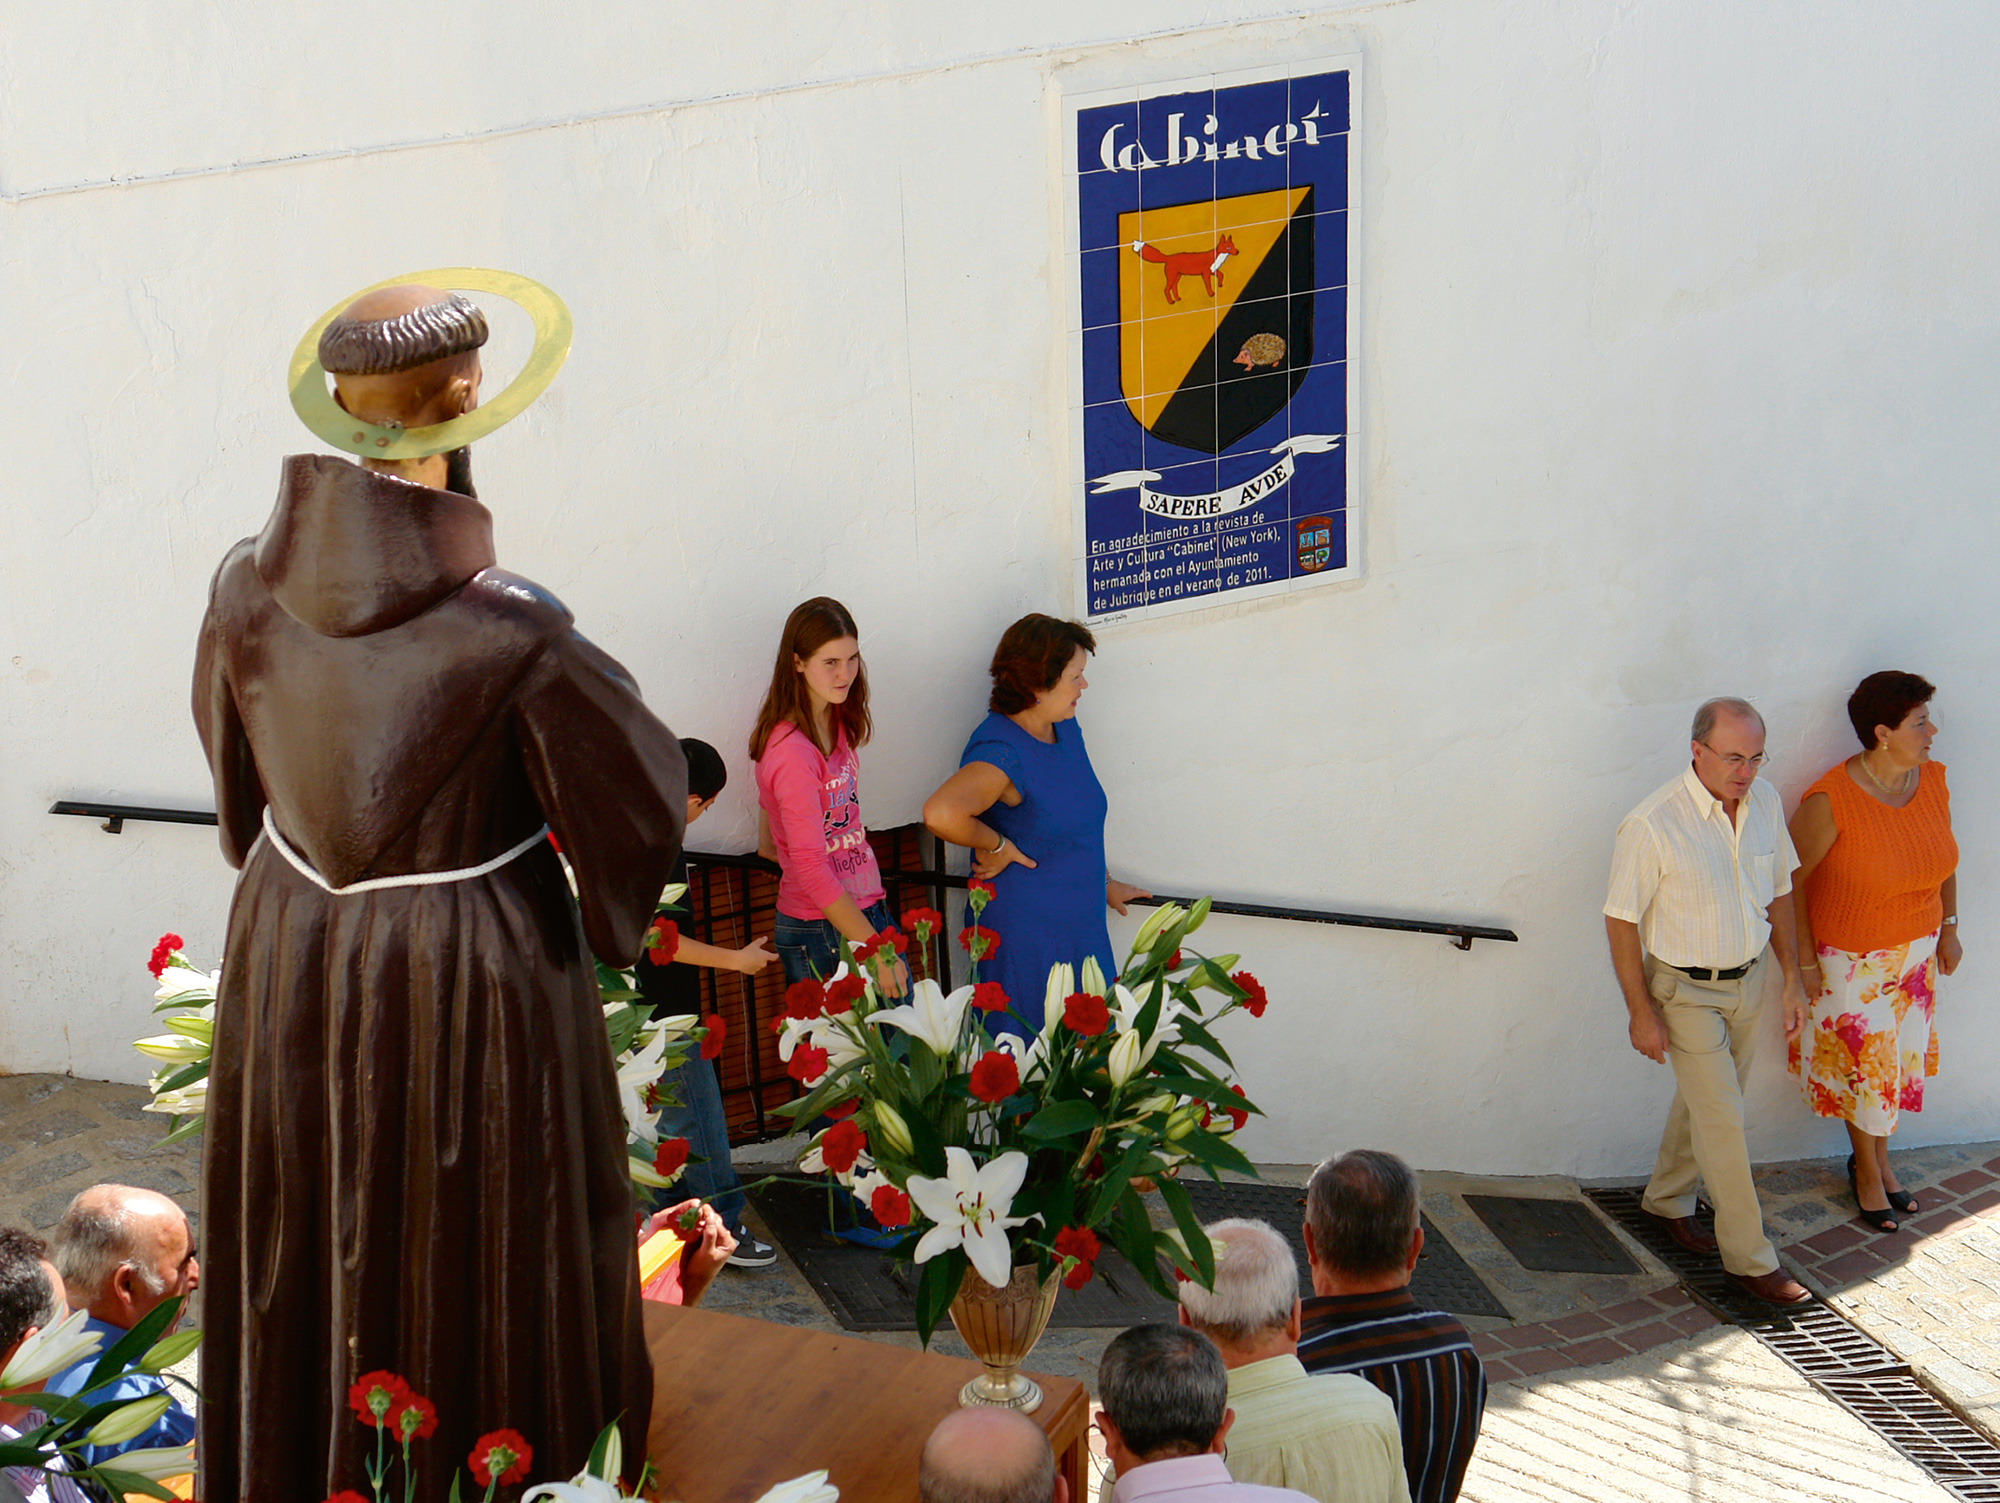 Jubrique’s patron saint, Francis of Assisi, contemplates Cabinet’s fox and hedgehog during the 2012 annual religious procession. Photo Carolan Price.